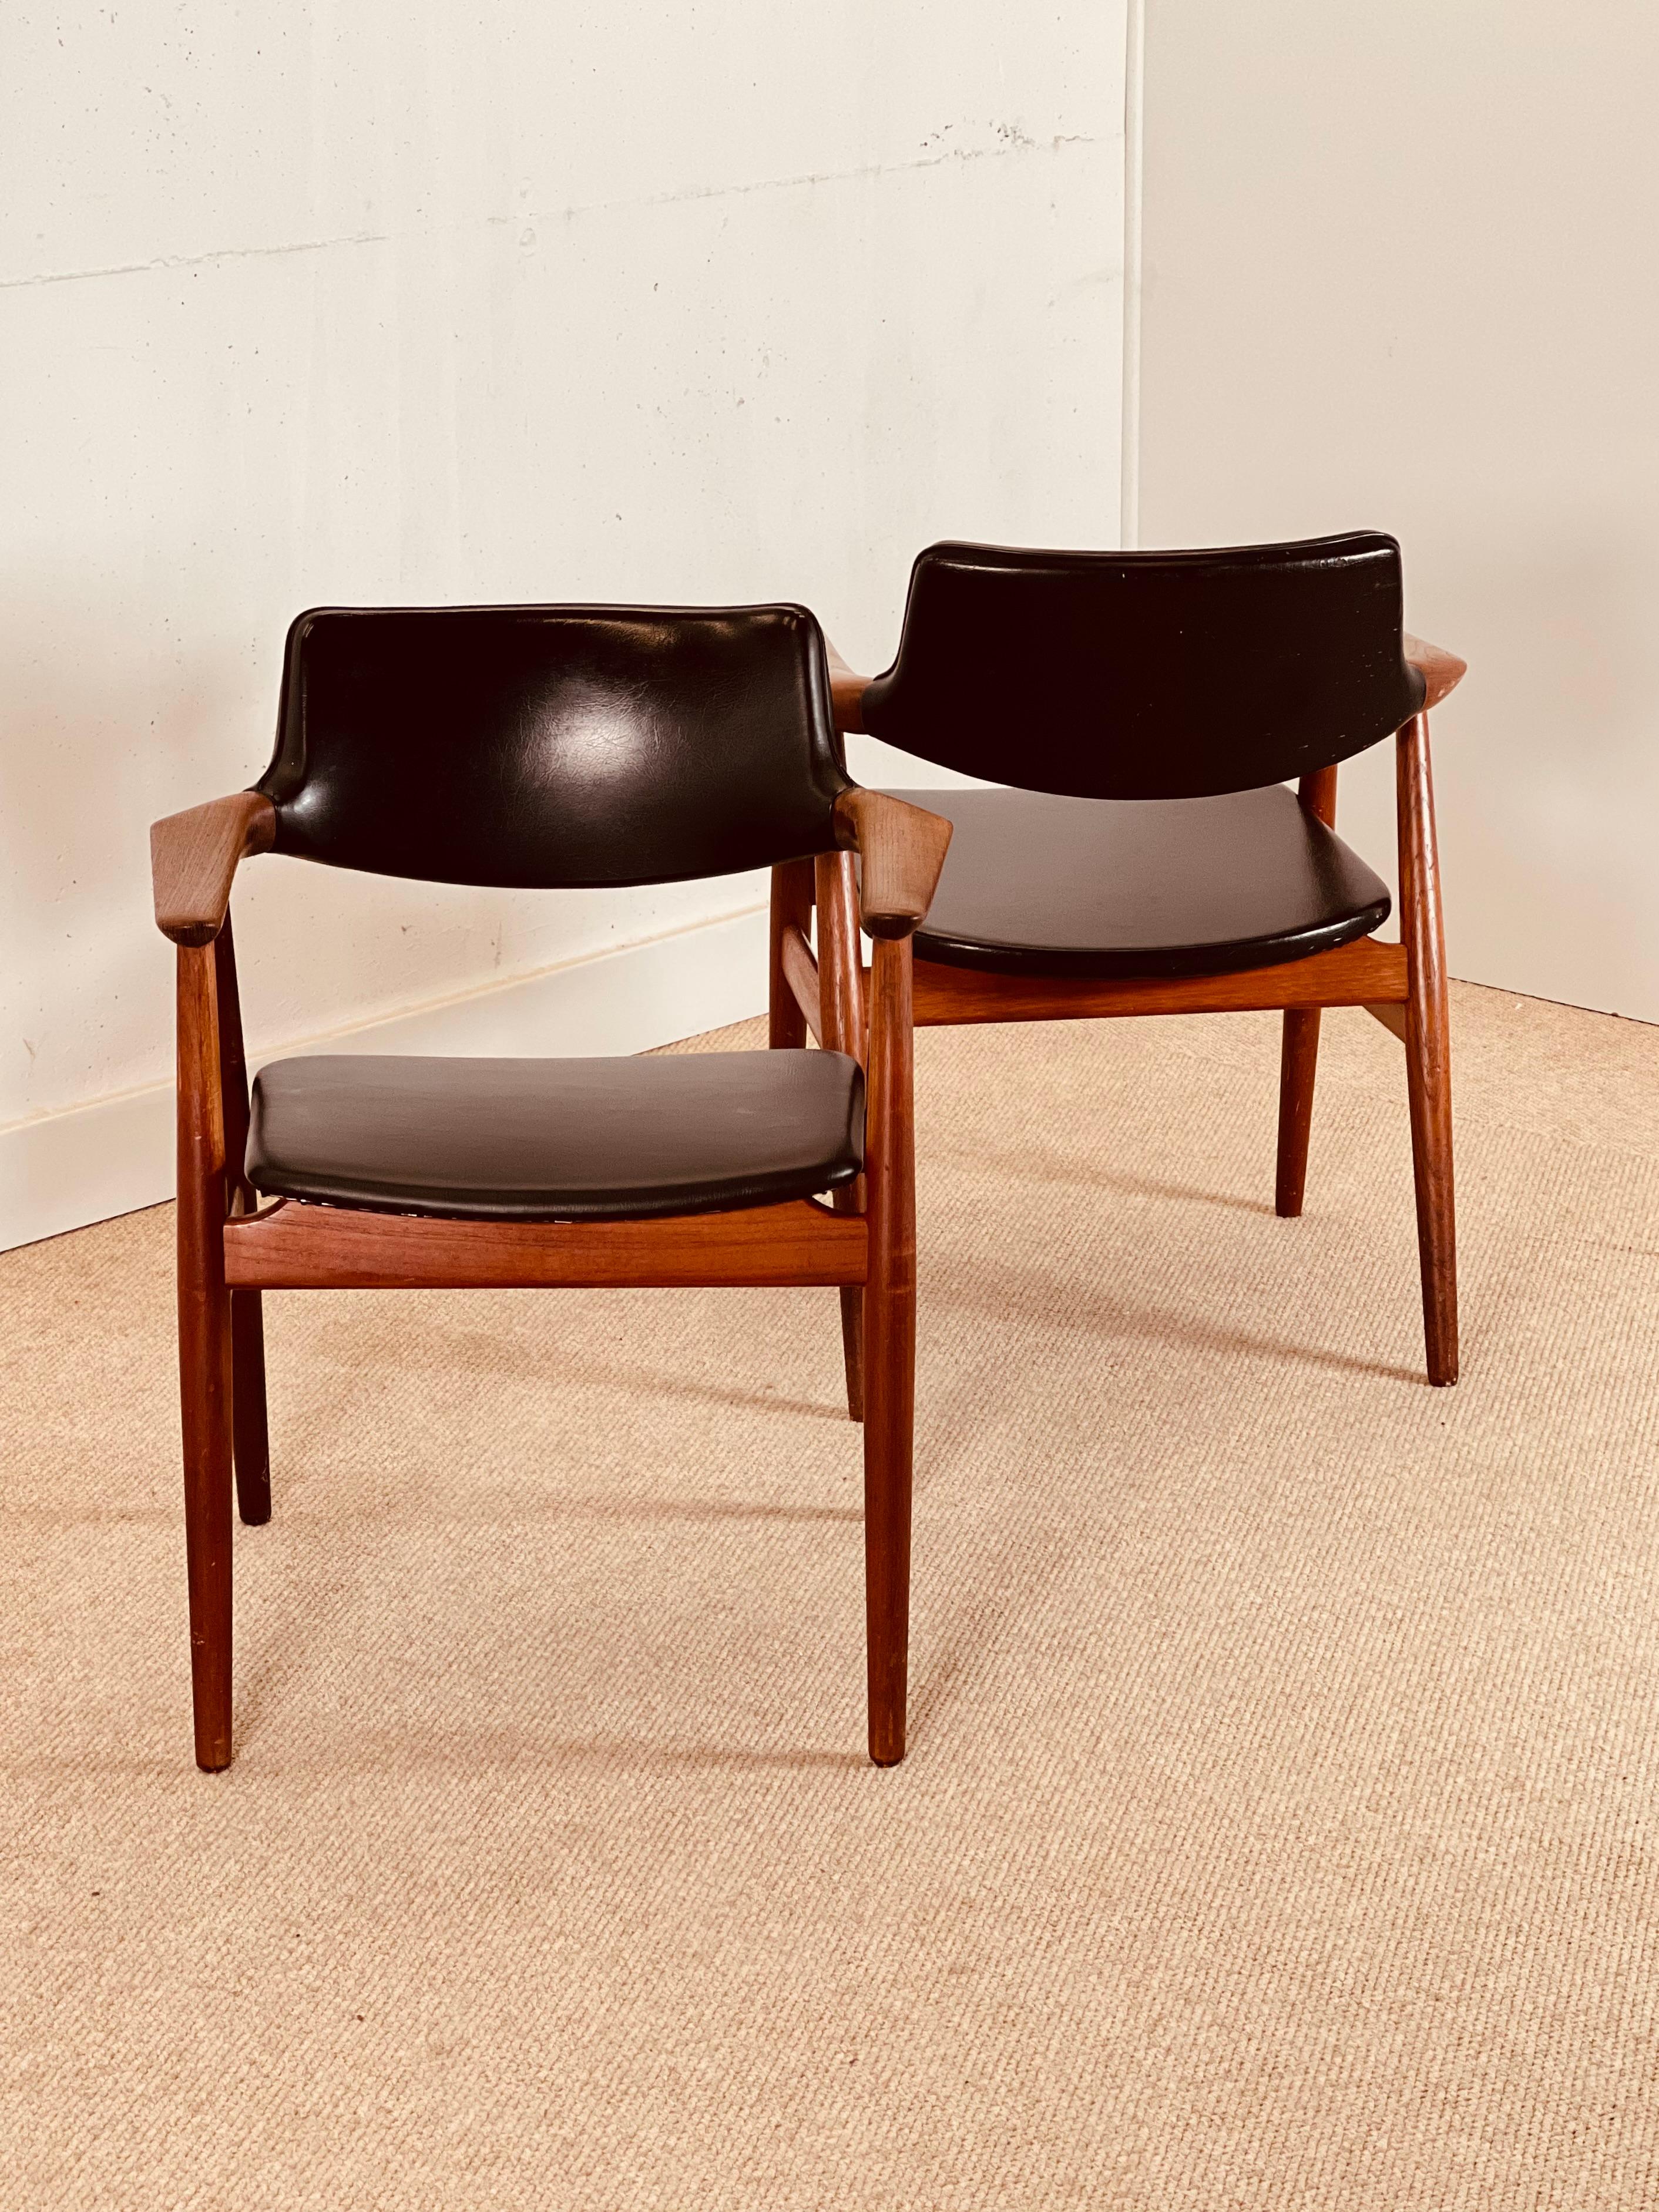 A Set Of Four or six Svend Aage Eriksen Dining Room Chair Model Gm11, 1960 In Excellent Condition For Sale In Buxton, GB